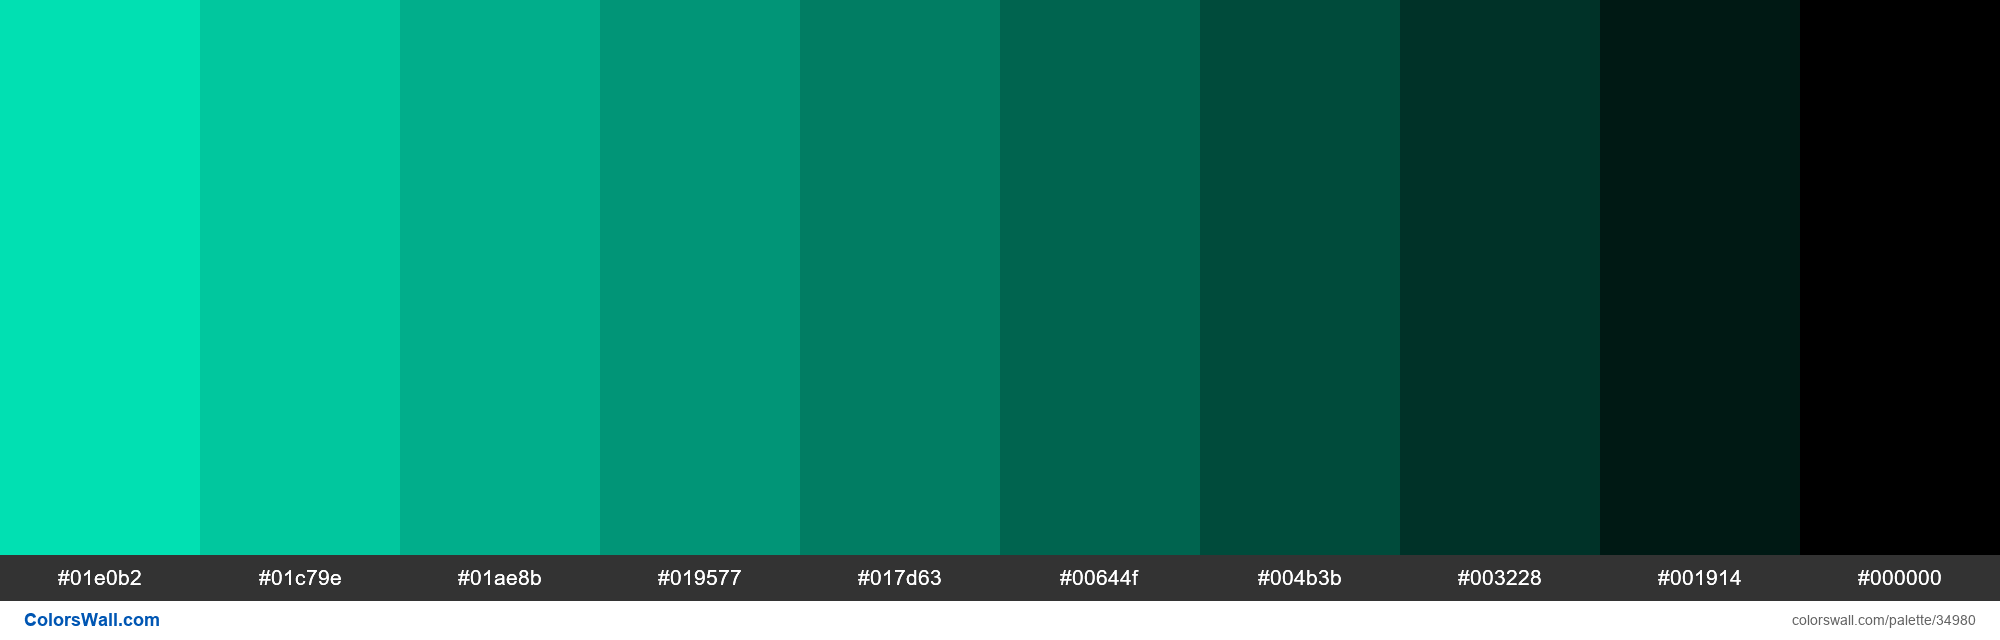 colorswall on X: Shades XKCD Color neon green #0cff0c hex #0be60b,  #0acc0a, #08b308, #079907, #068006, #056605, #044d04, #023302, #011901,  #000000 #colors #palette   /  X